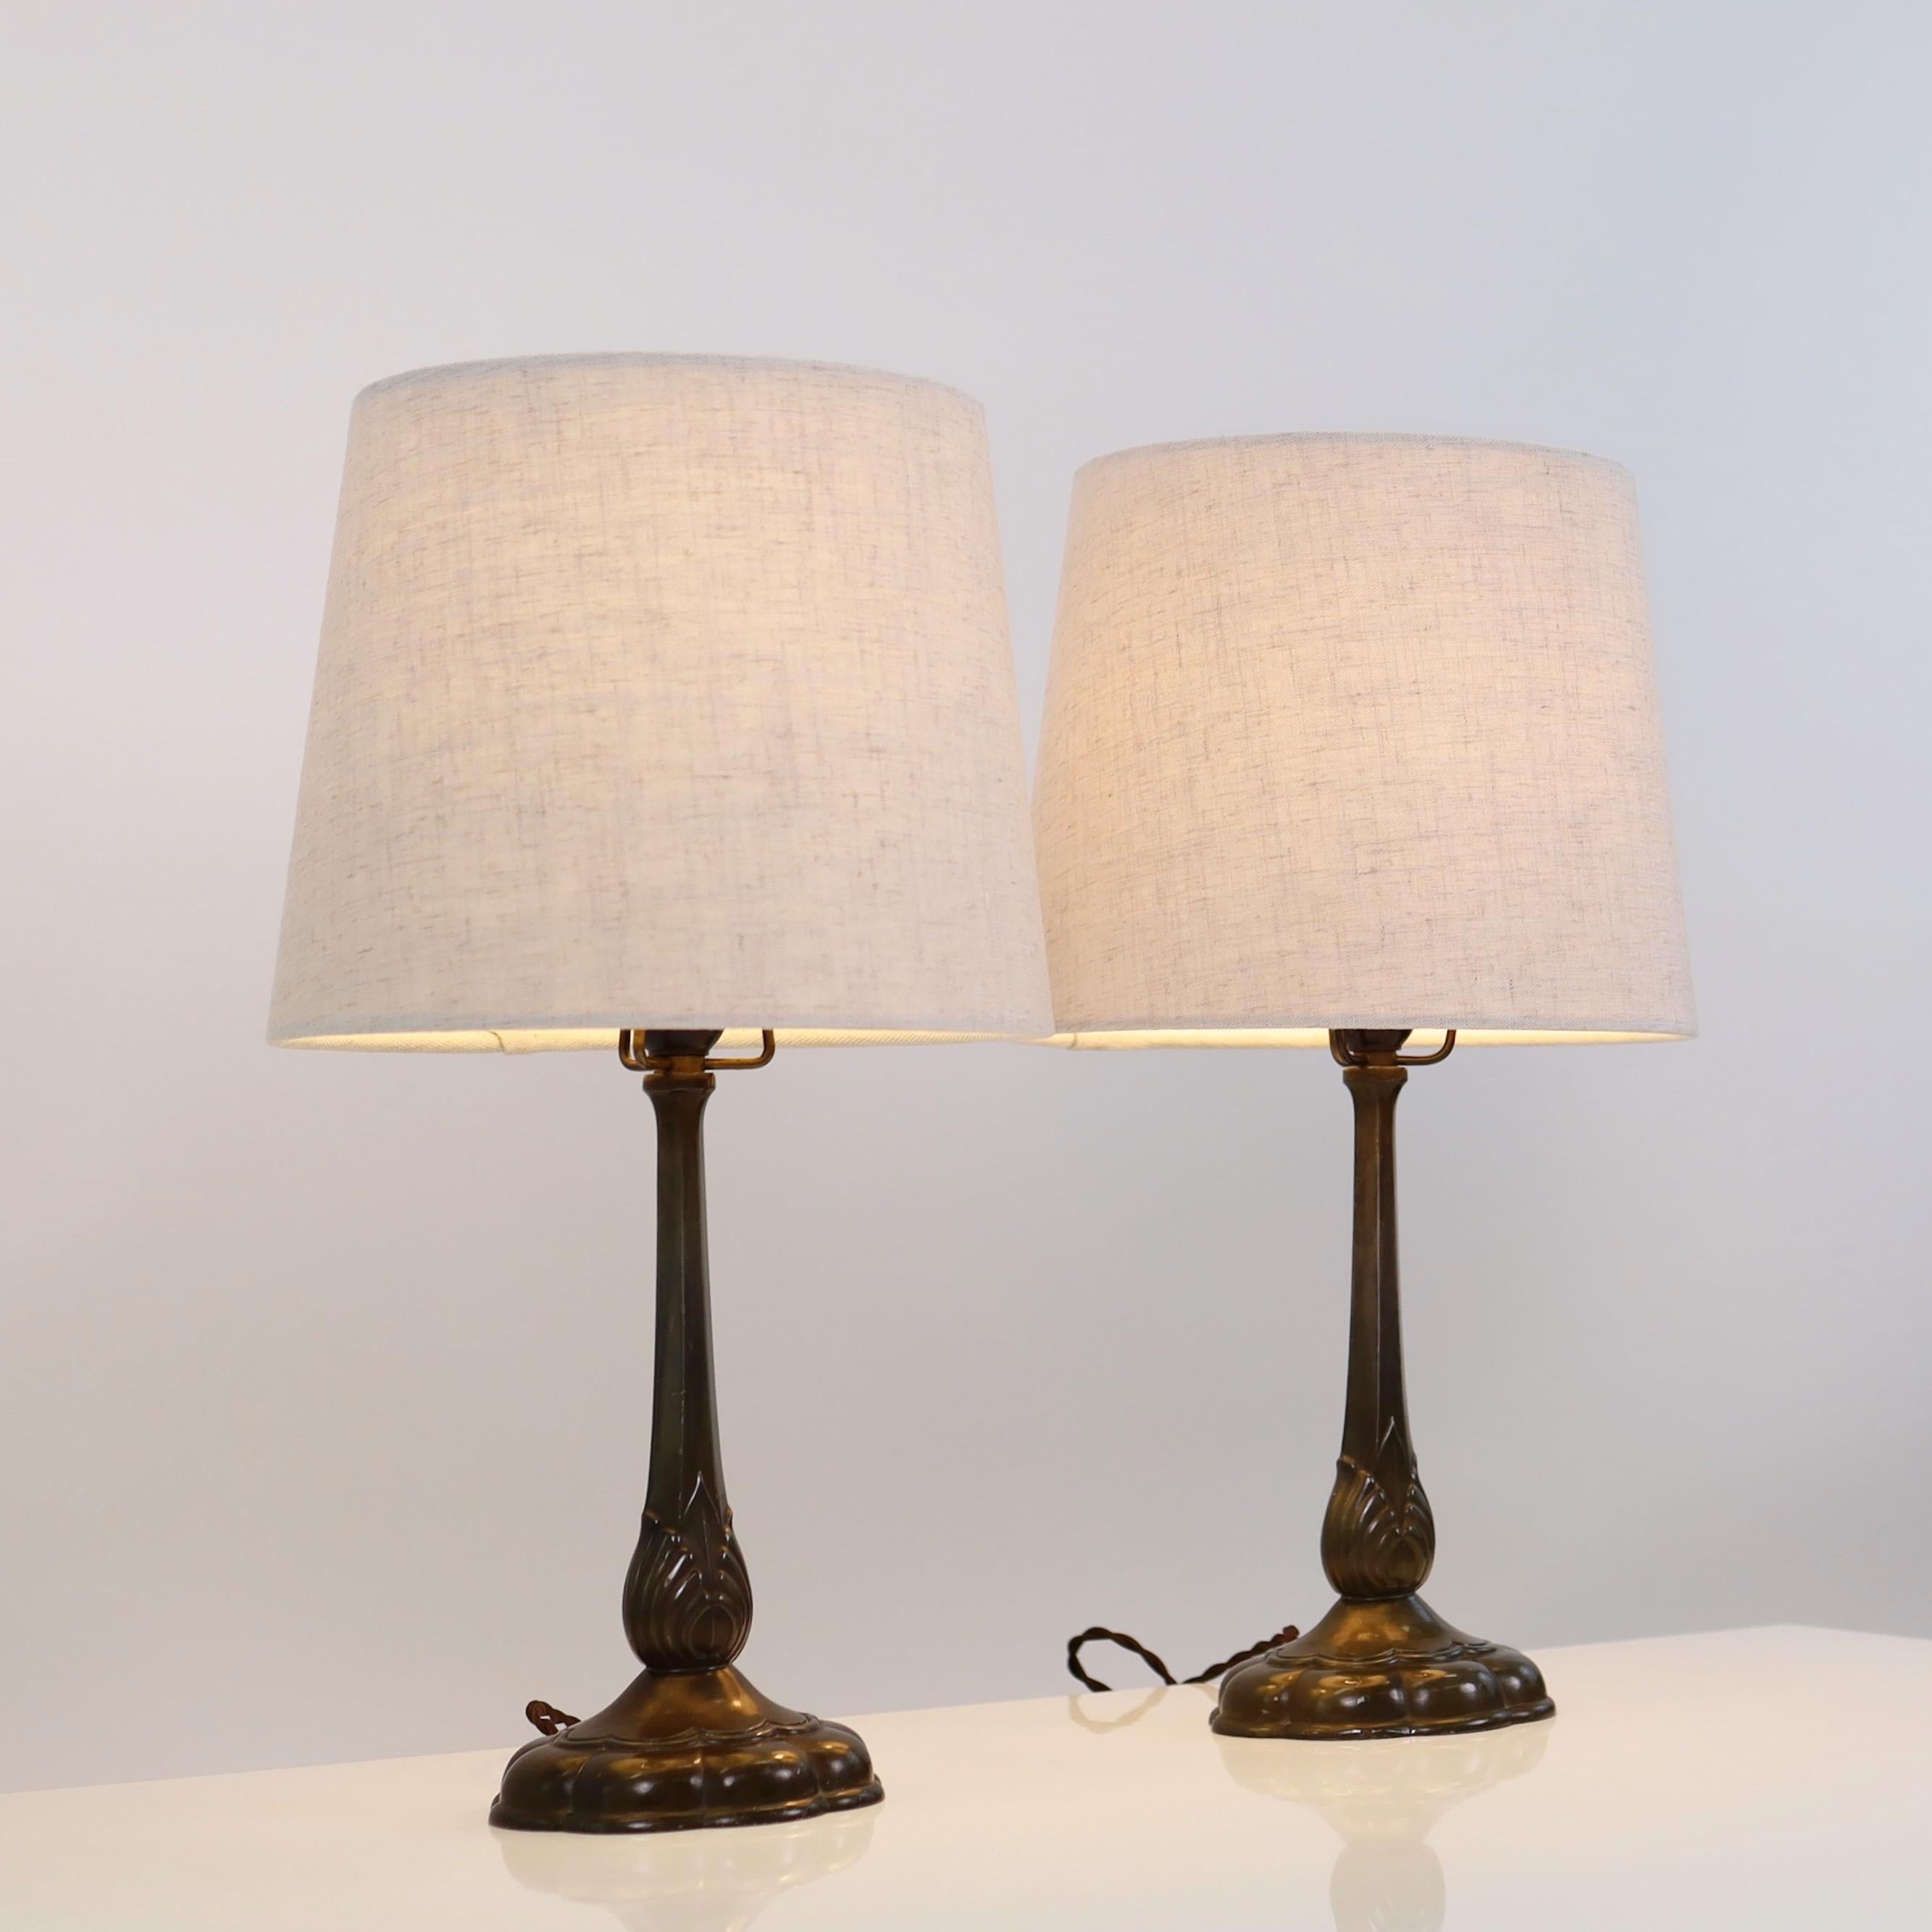 A set of early Just Andersen table lamps made in the 1920s. A rare set in good vintage condition closing in on a 100 years of life-time.

* A set (2) of metal desk lamps with vertical lines on an flower-shaped foot with ornaments and beige fabric